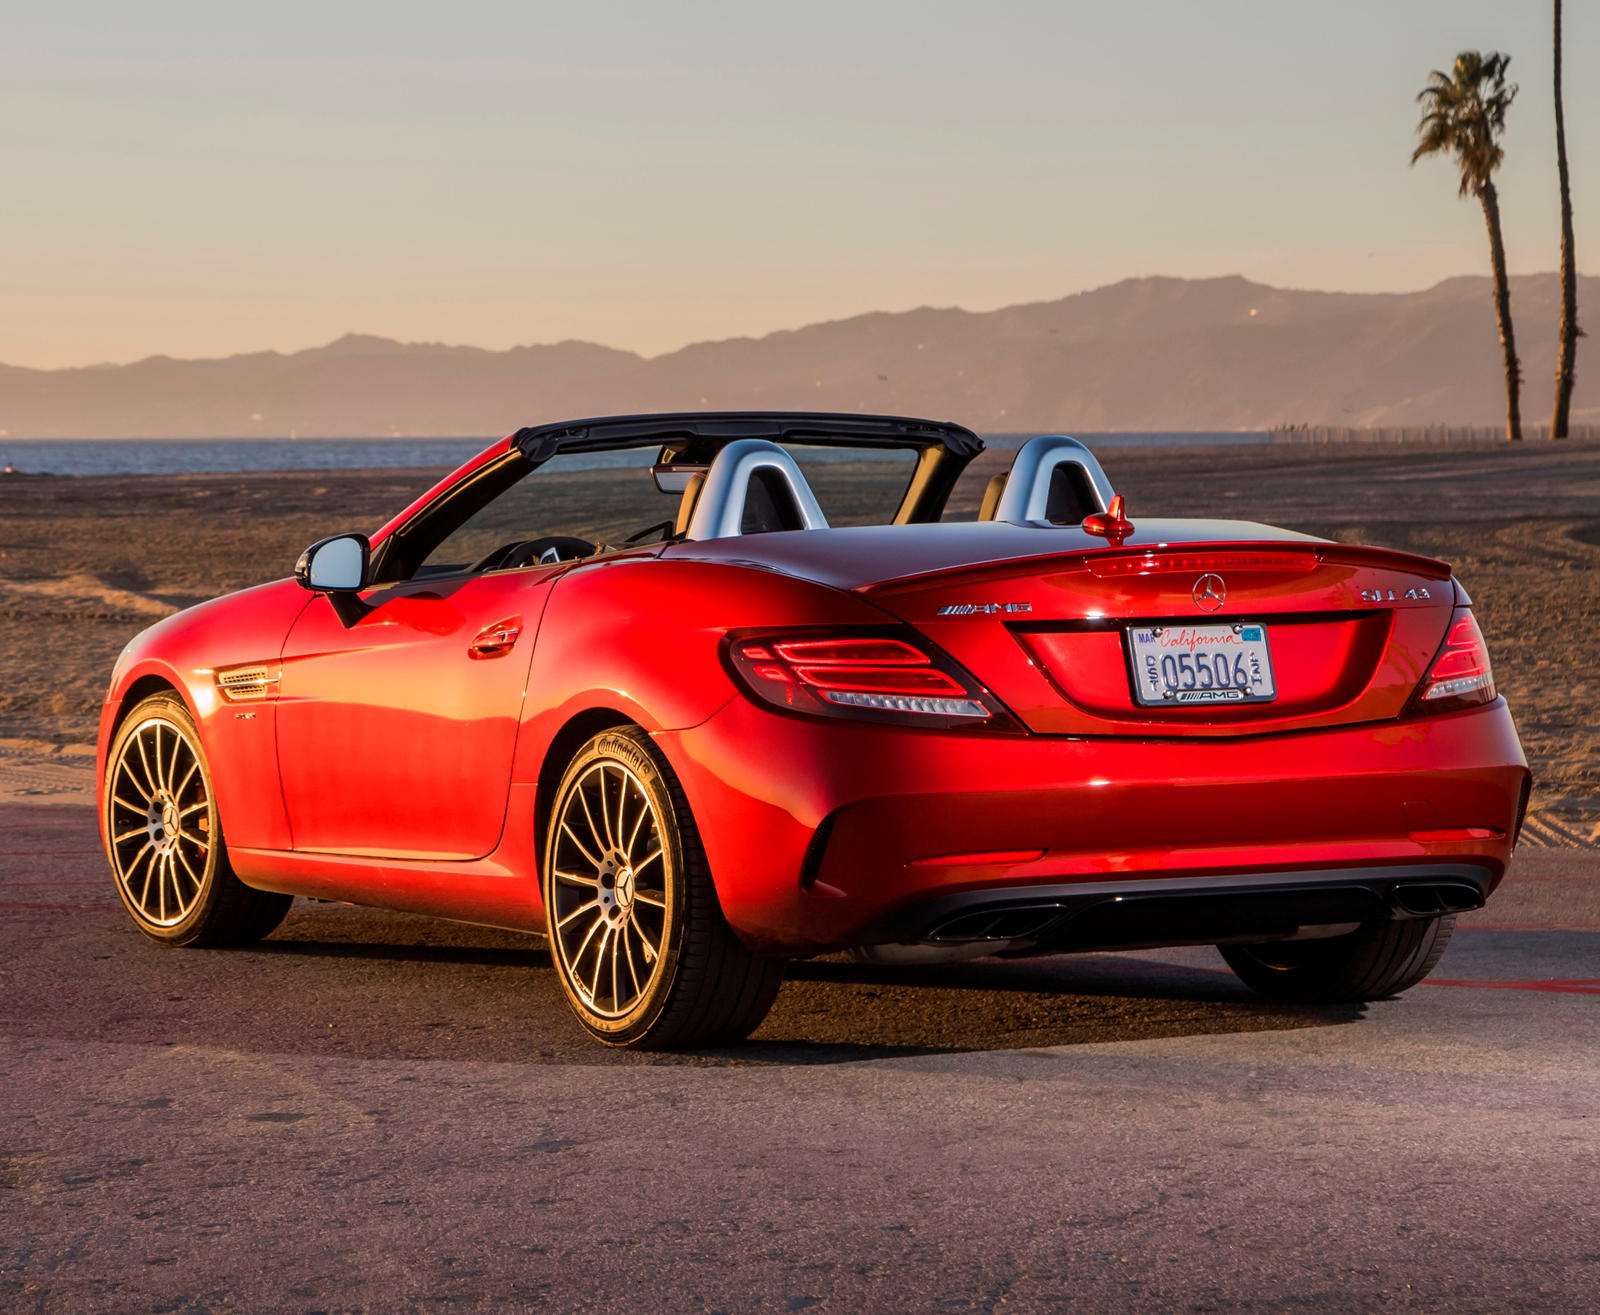 Unlike The BMW Z4 Mercedes Benz SLC Could Be Living On Borrowed.